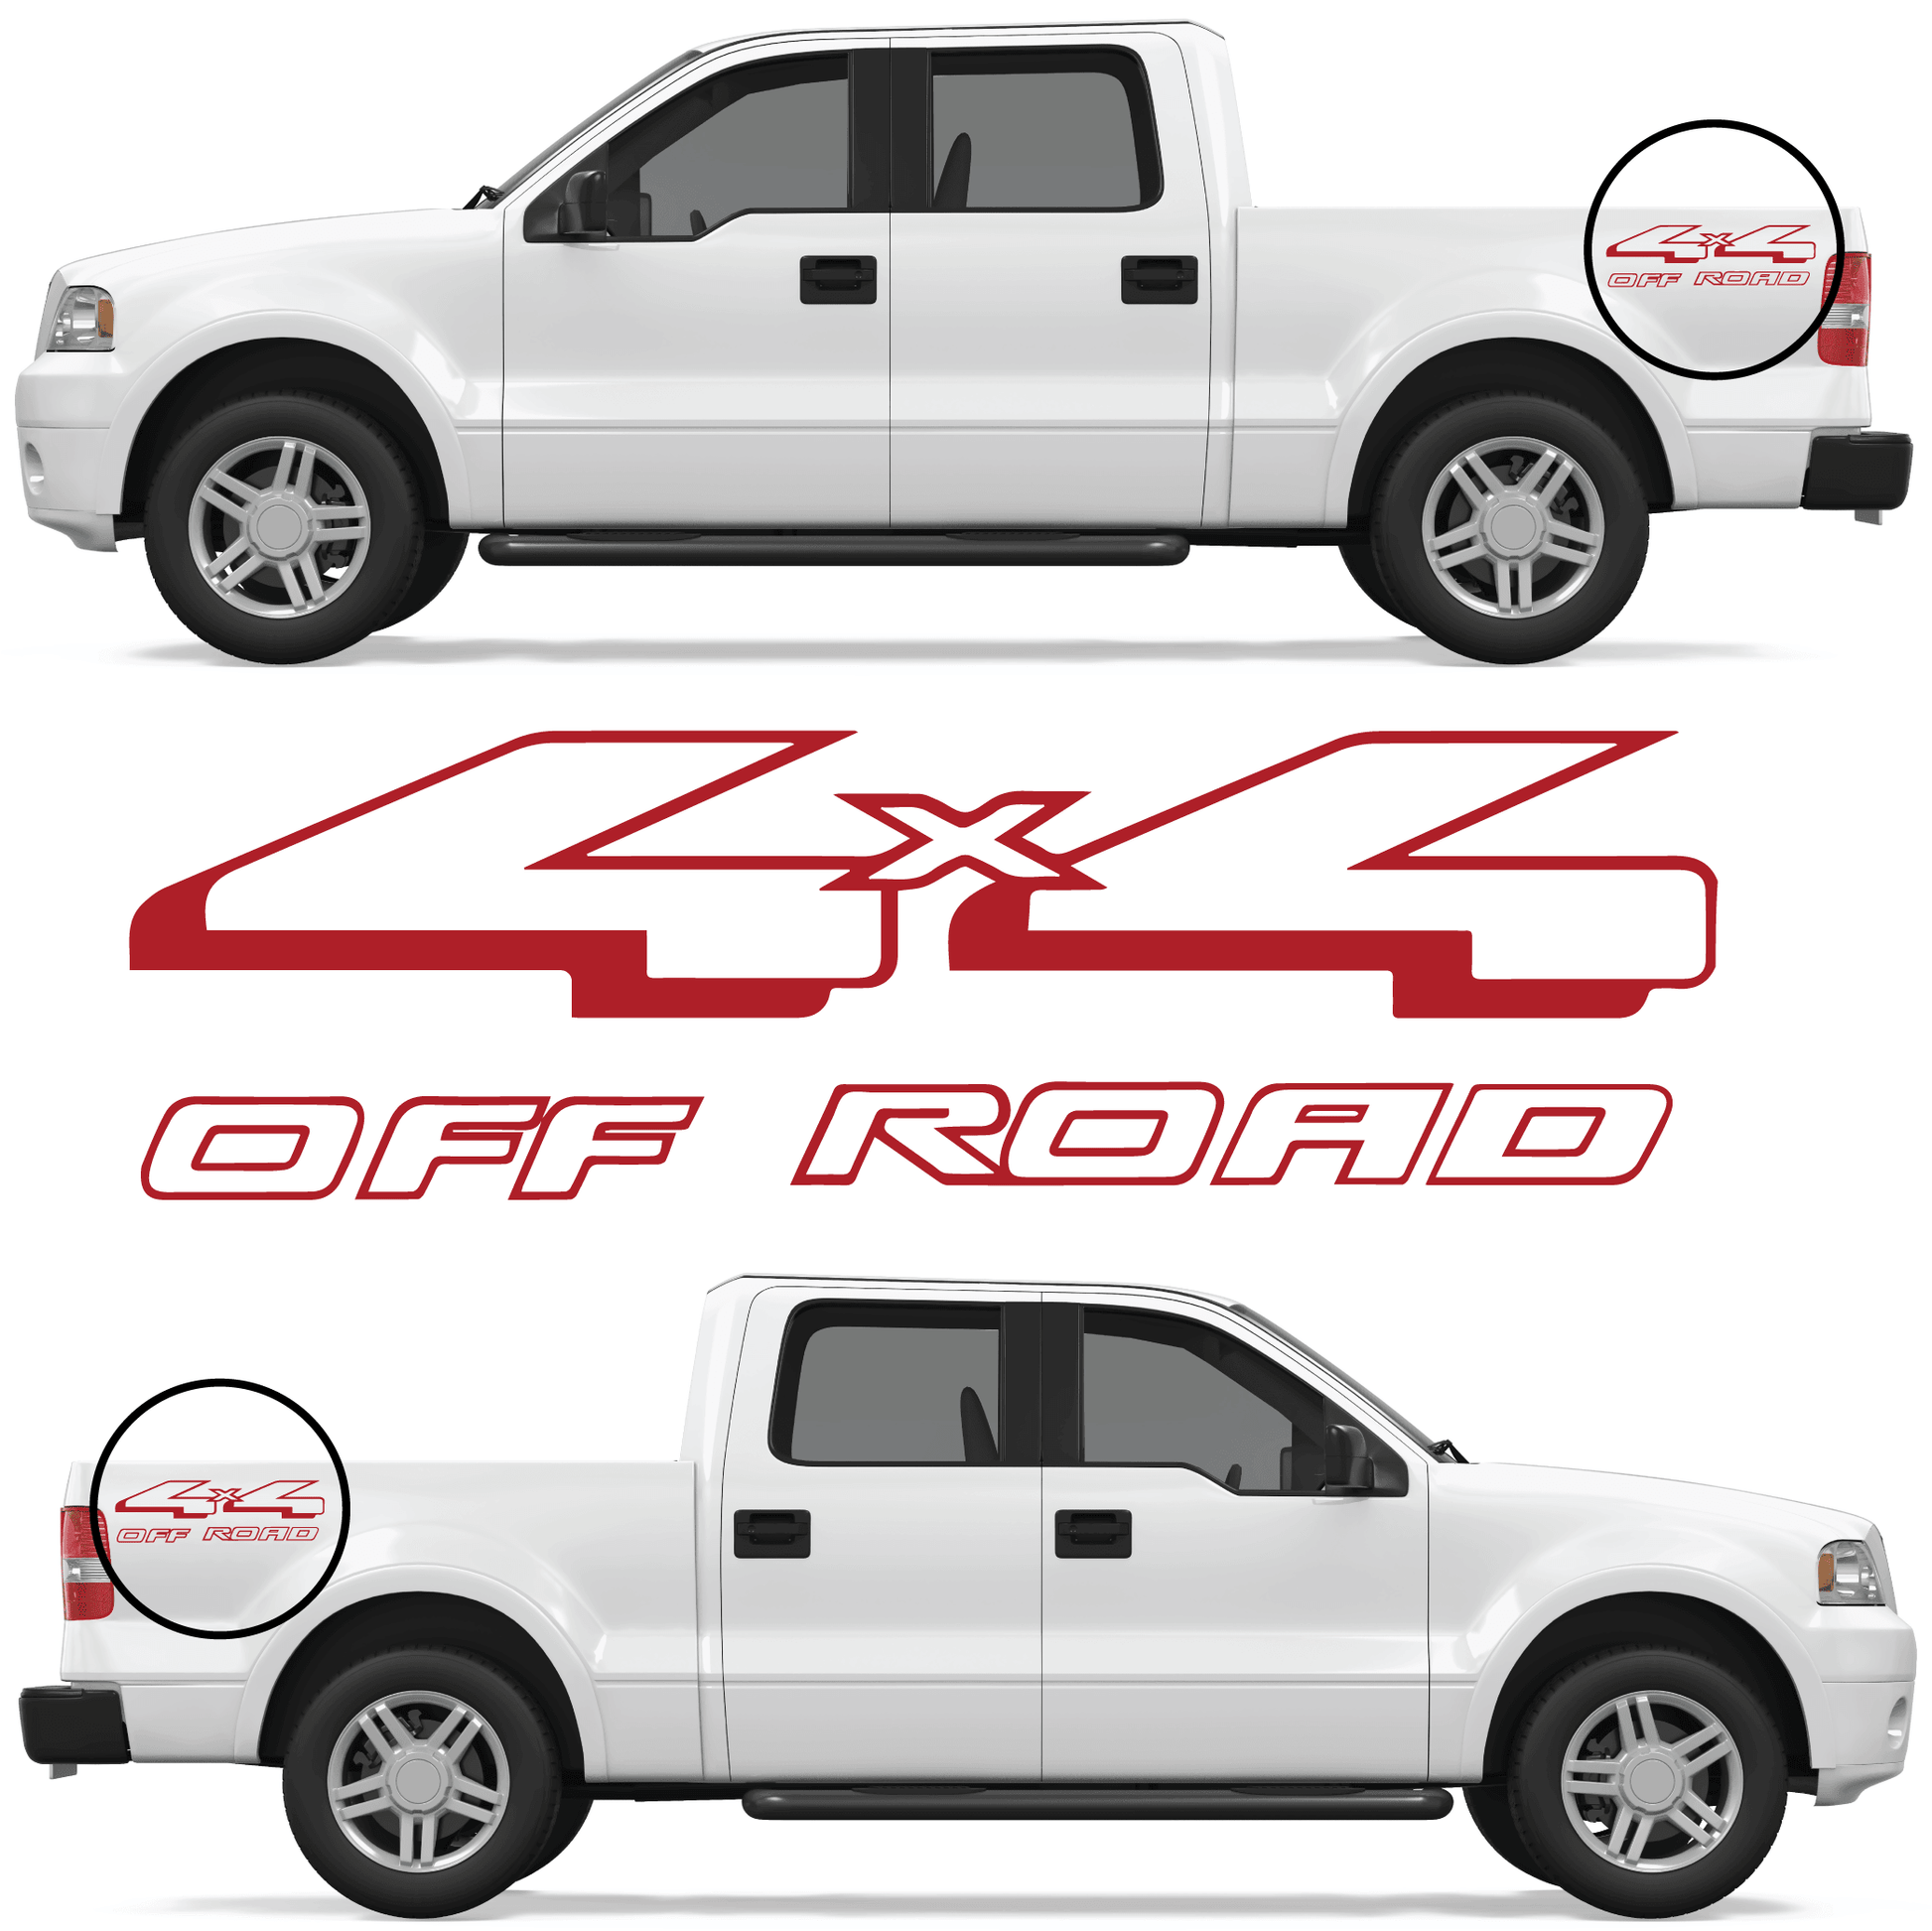 Shop Vinyl Design F-150 F-250 Trucks 4 x 4 Off Road Replacement Bedside Decals #08 (14x4) Vehicle decal 001 Red Gloss Shop Vinyl Design decals stickers